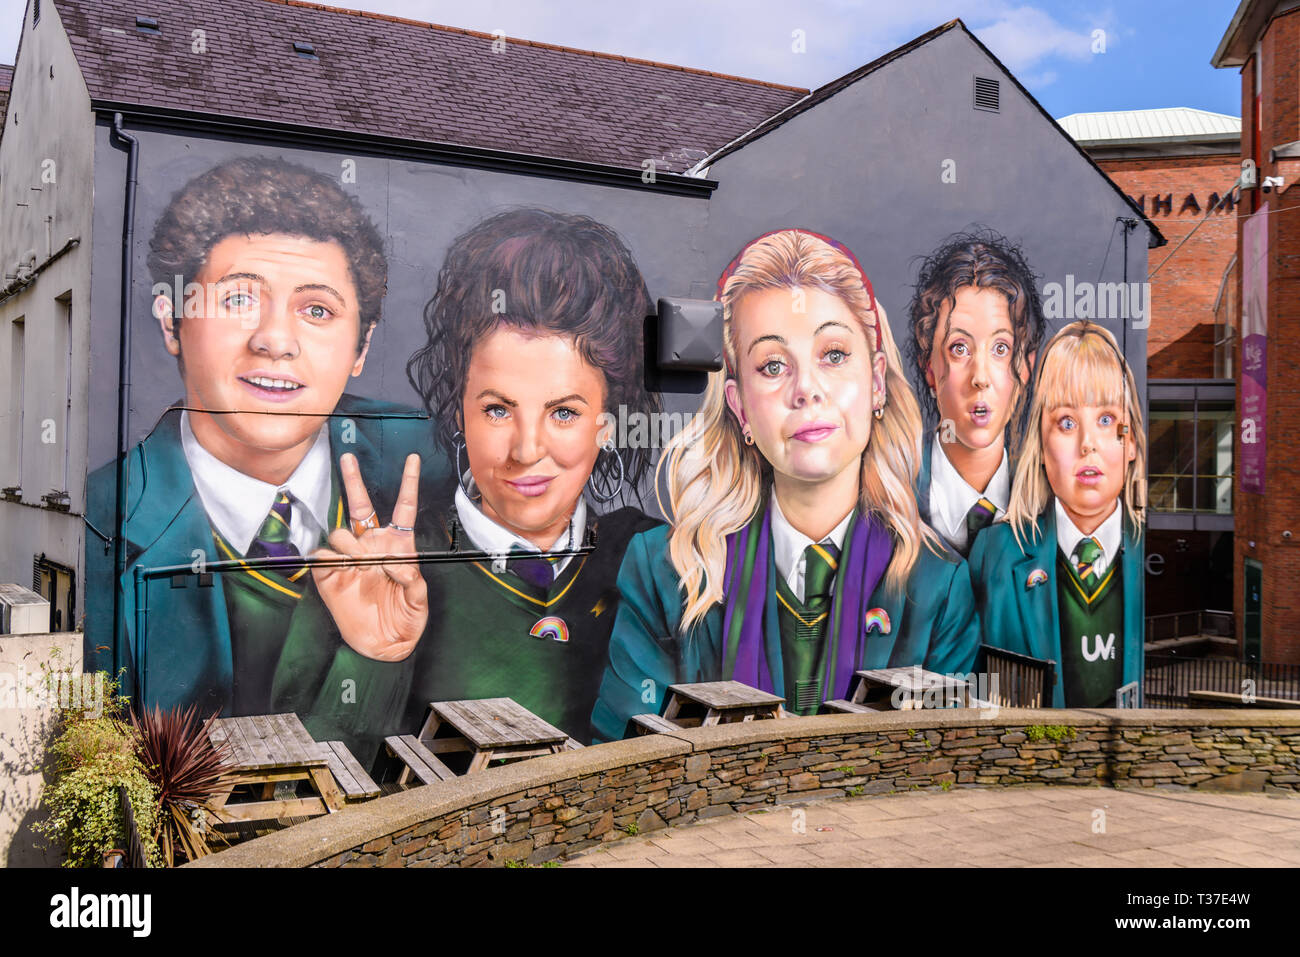 Mural featuring the main characters from the Channel 4 television series 'Derry Girls' on the wall of the Badger Pub, Derry, Londonderry, Northern Ire Stock Photo